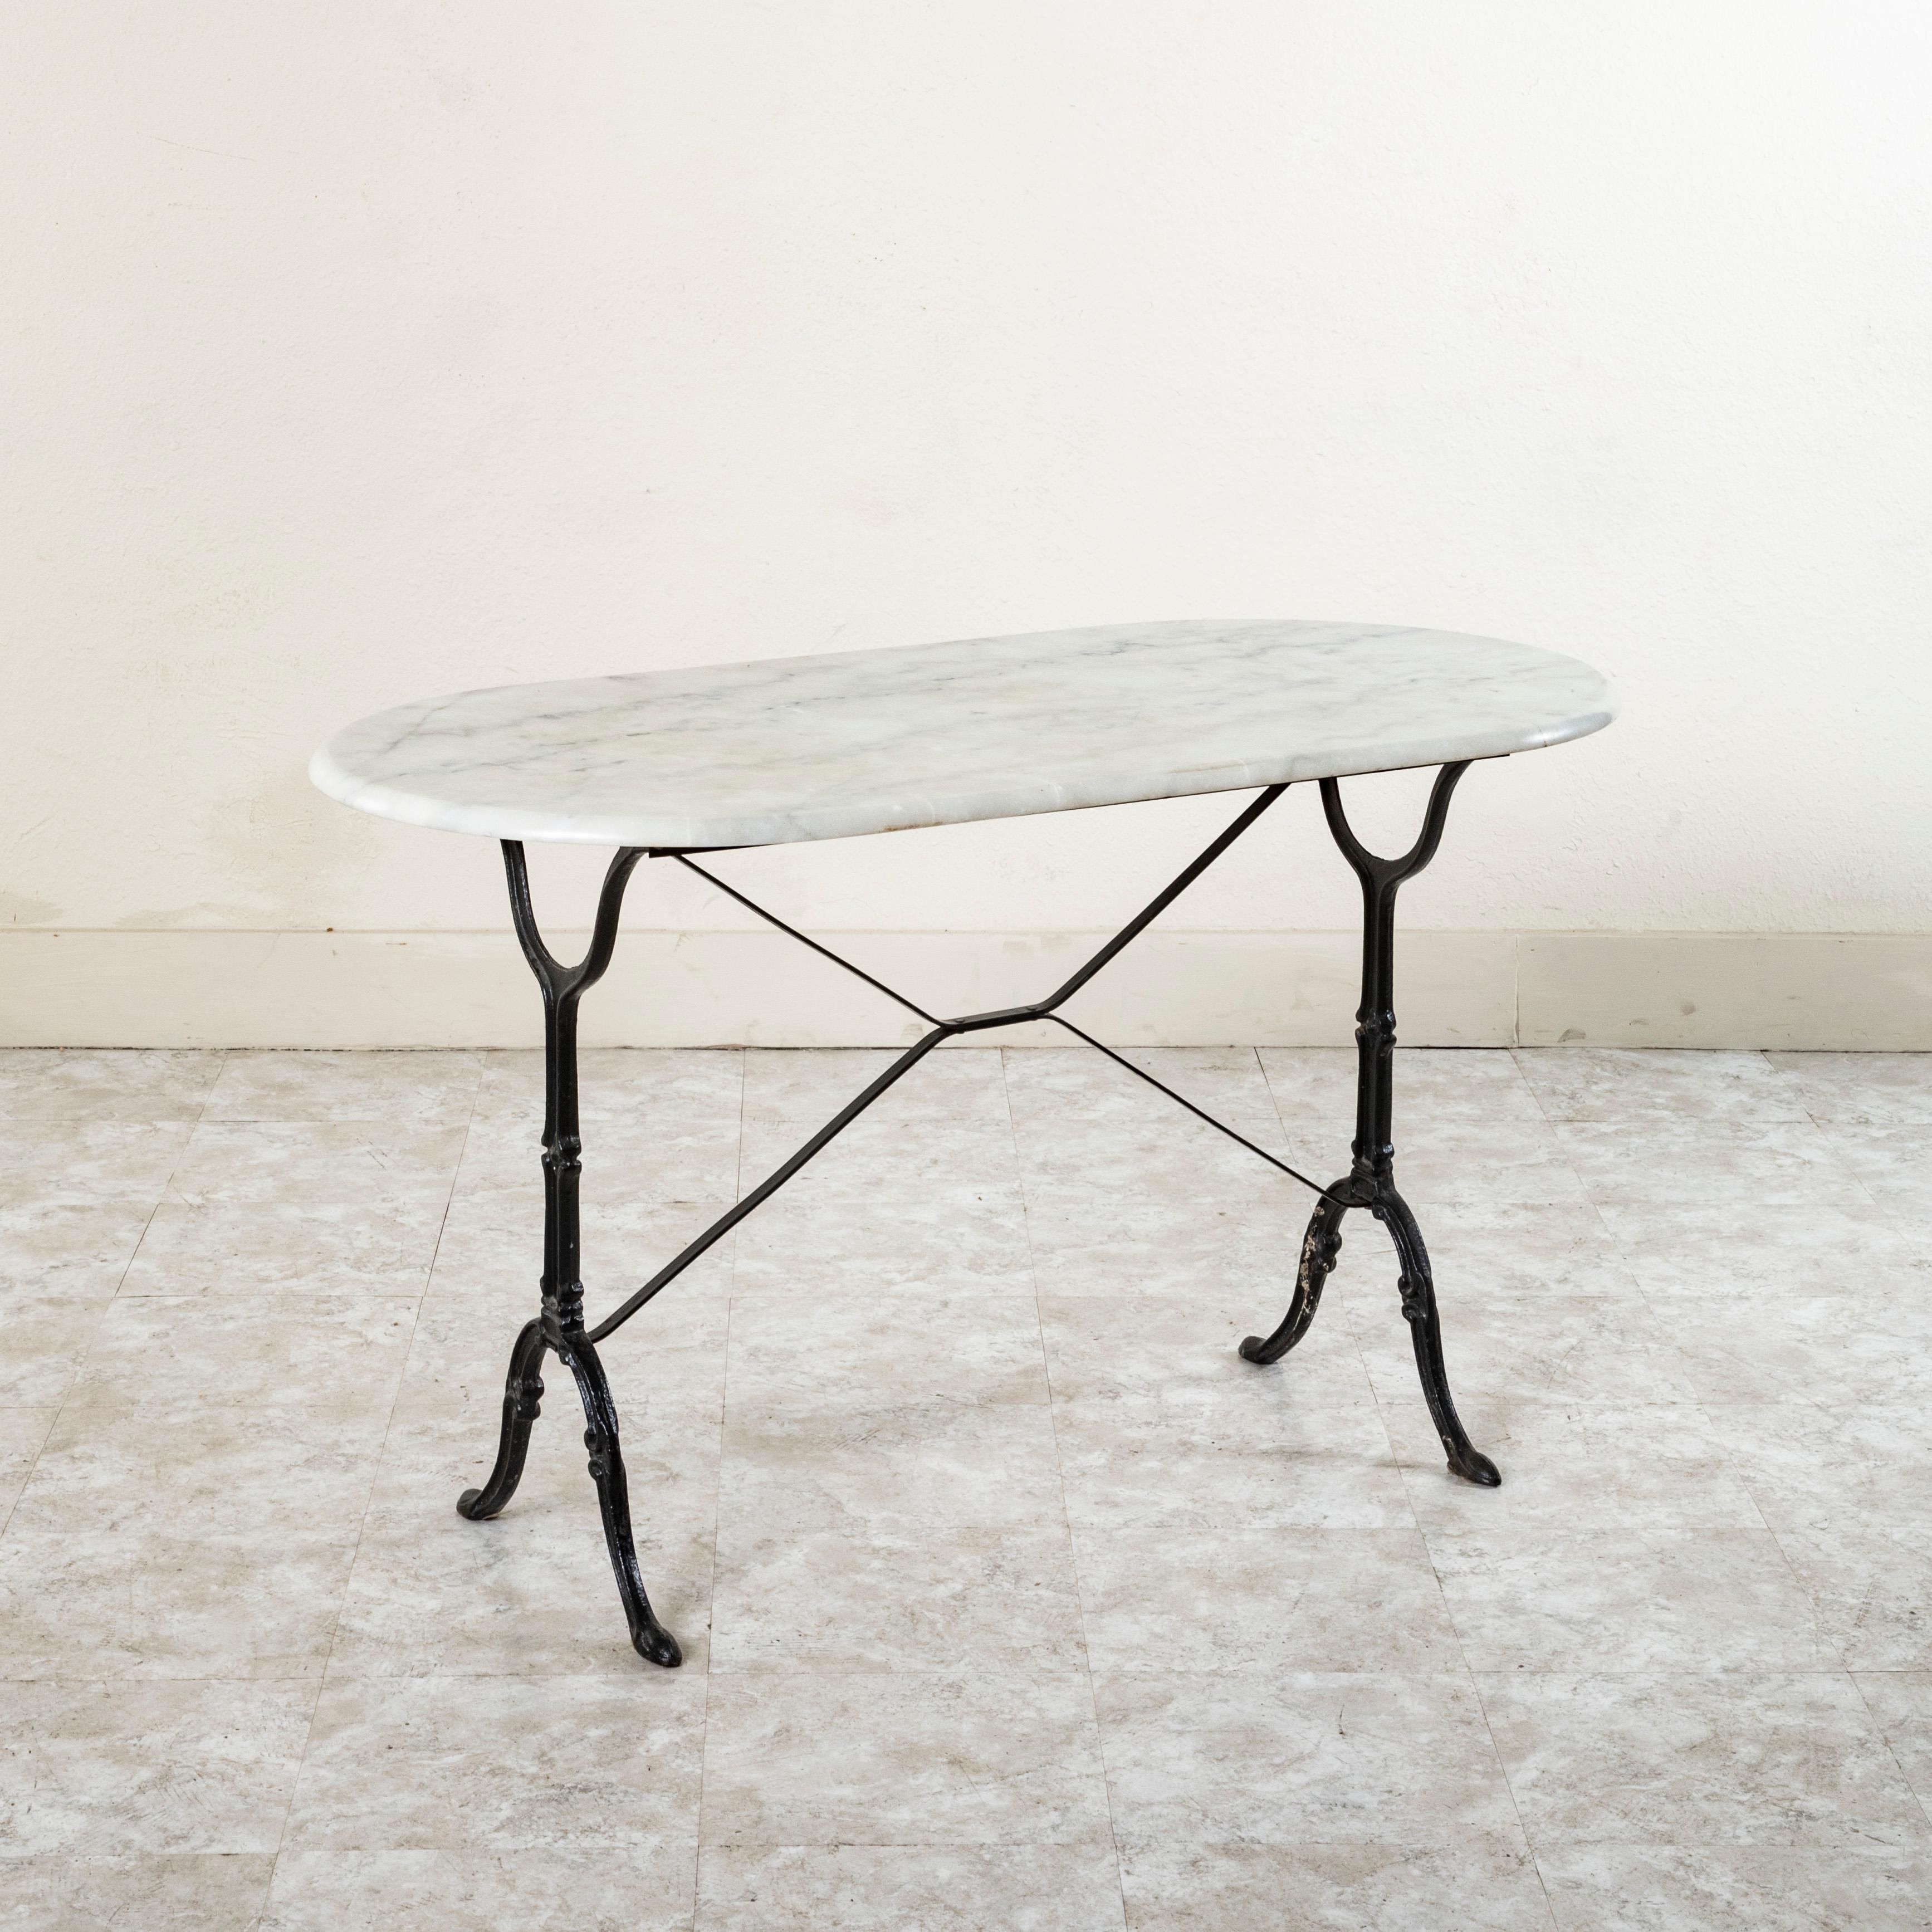 Originally used in a French brasserie in the mid twentieth century, this cast iron bistro table or cafe table features a solid white oval marble top with grey veining. Scrolled iron legs support the top and are joined by an X-stretcher that provides